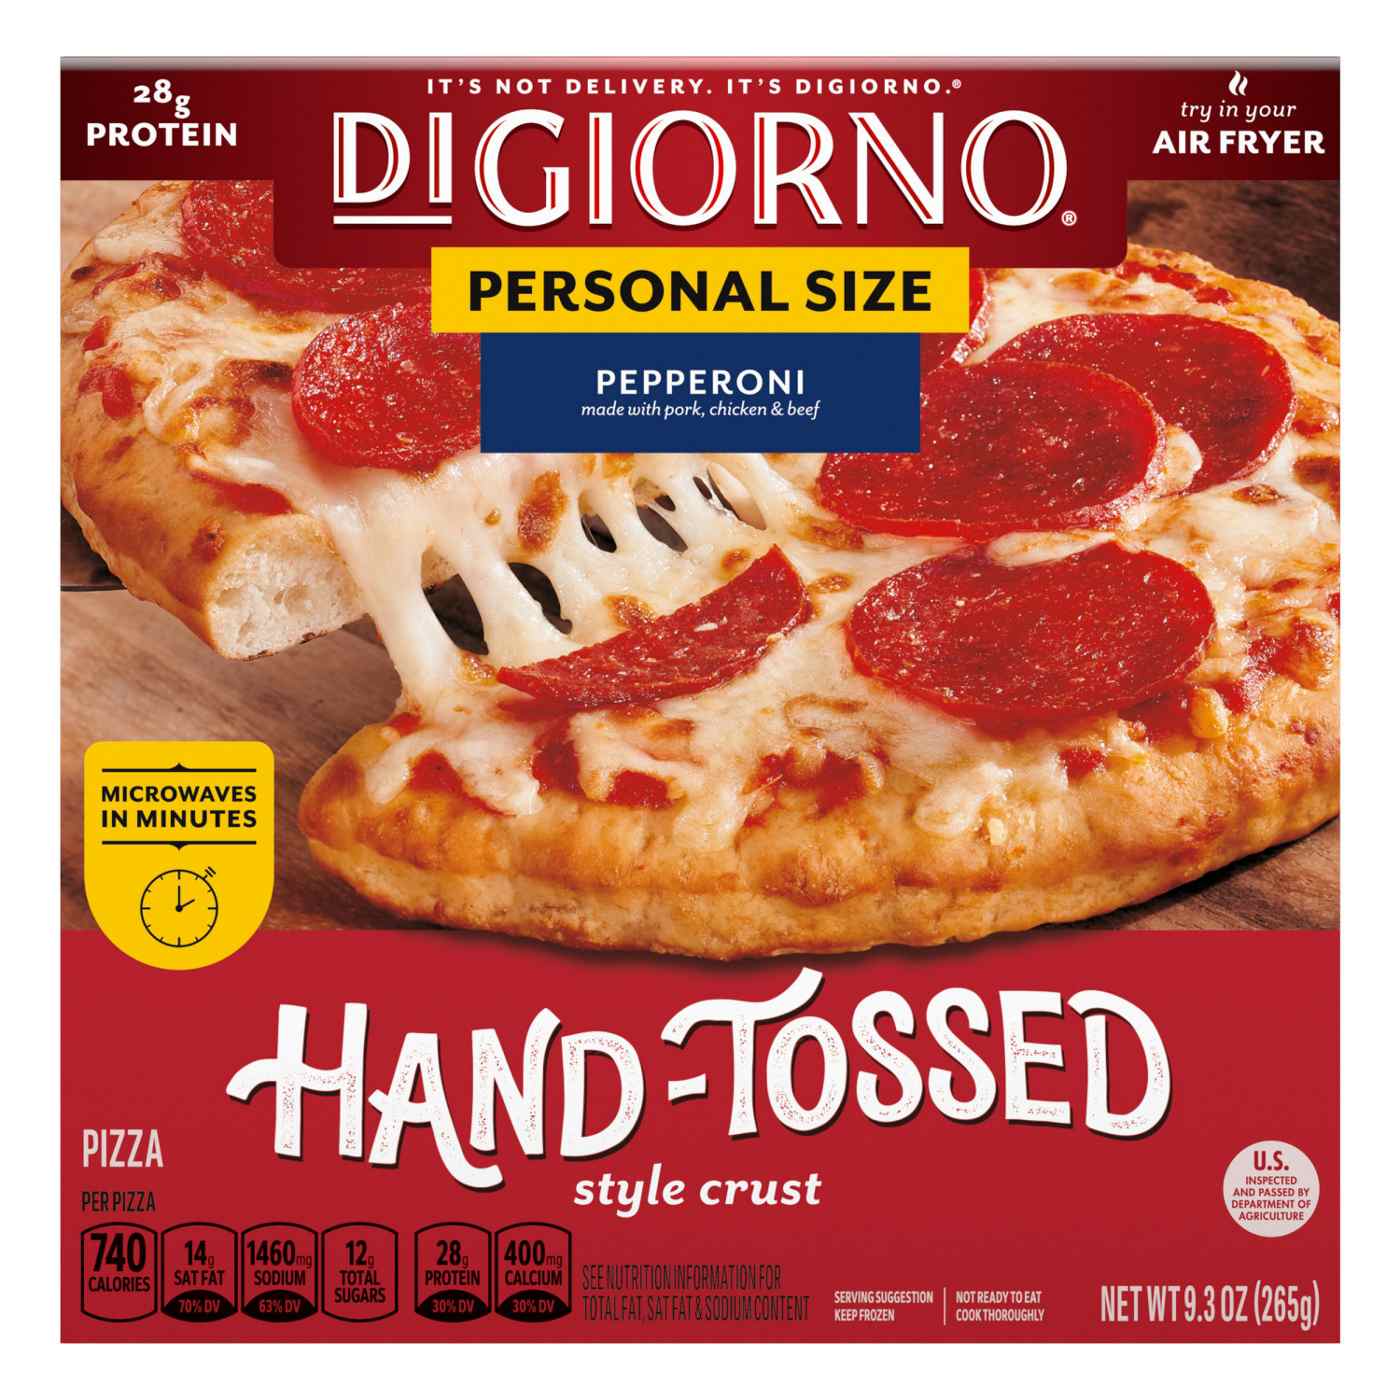 DiGiorno Hand-Tossed Crust Personal Size Frozen Pizza - Pepperoni; image 1 of 2